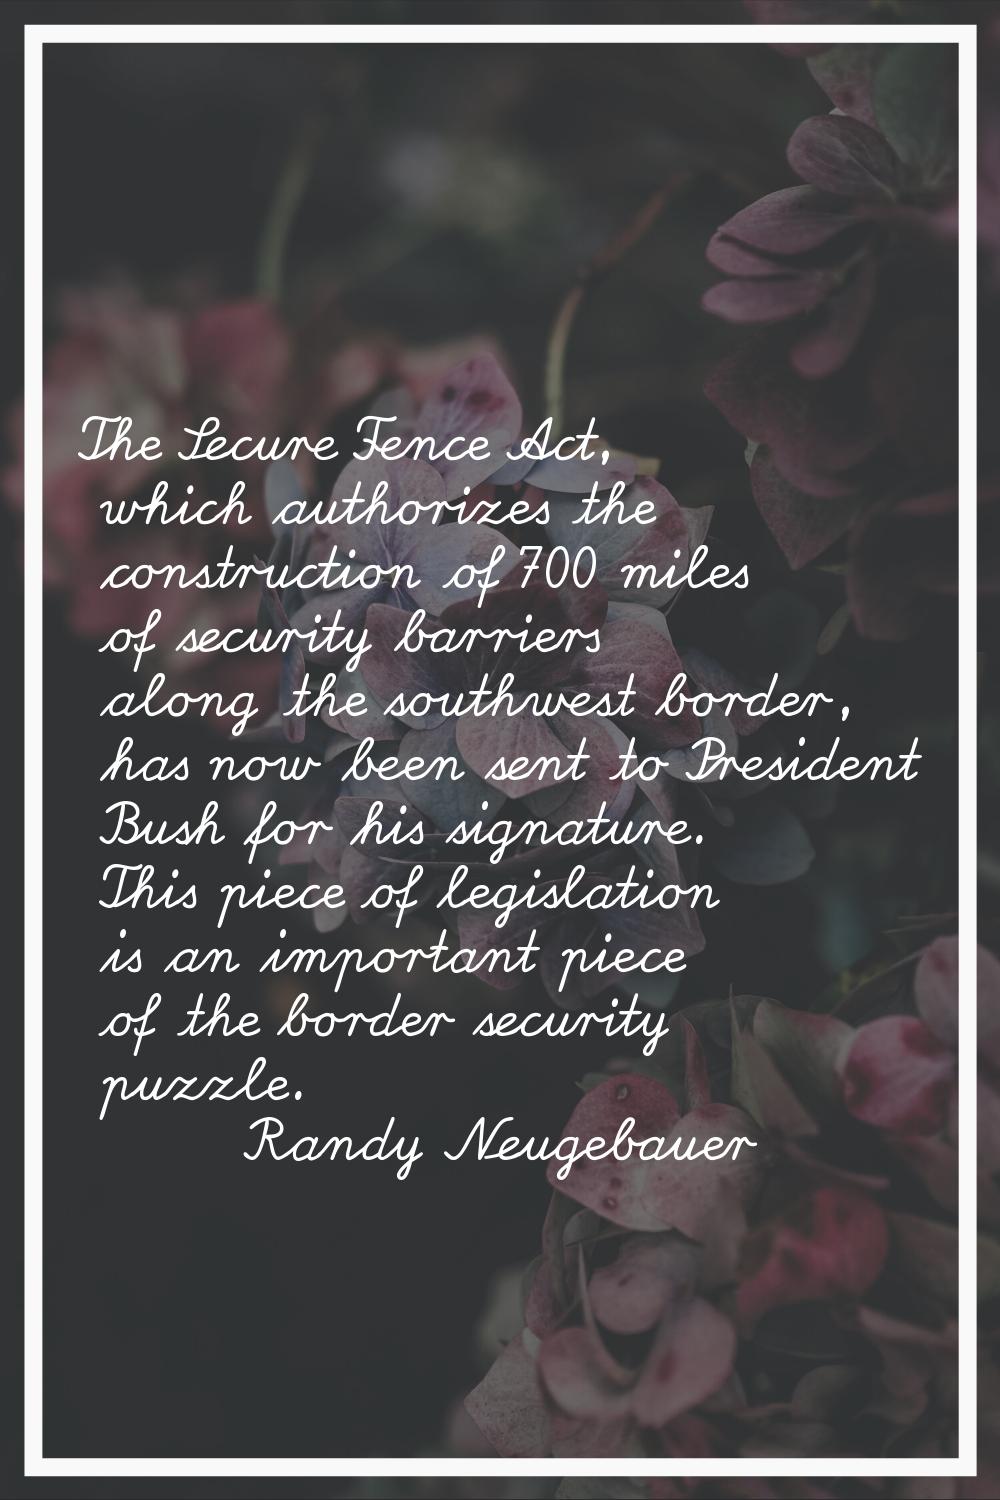 The Secure Fence Act, which authorizes the construction of 700 miles of security barriers along the